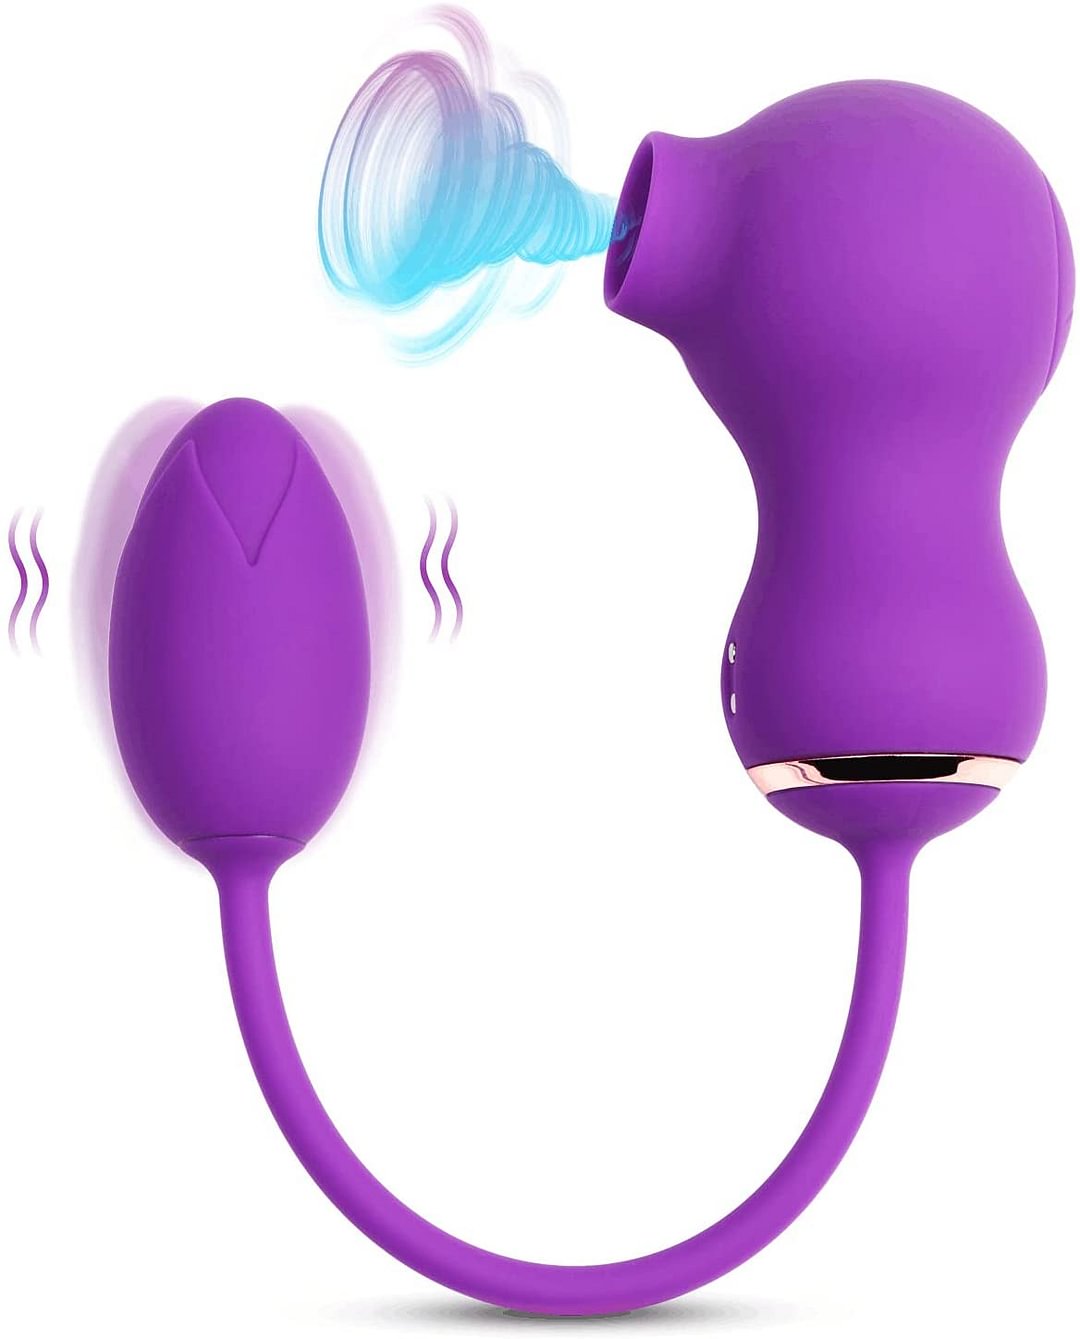 Rose Vibrator Clitoral Sucking Vibrator with Vibrating Egg, 2 in 1 Clit & G-spot Stimulator with 7 Suction & 7 Vibration Modes-Icossi